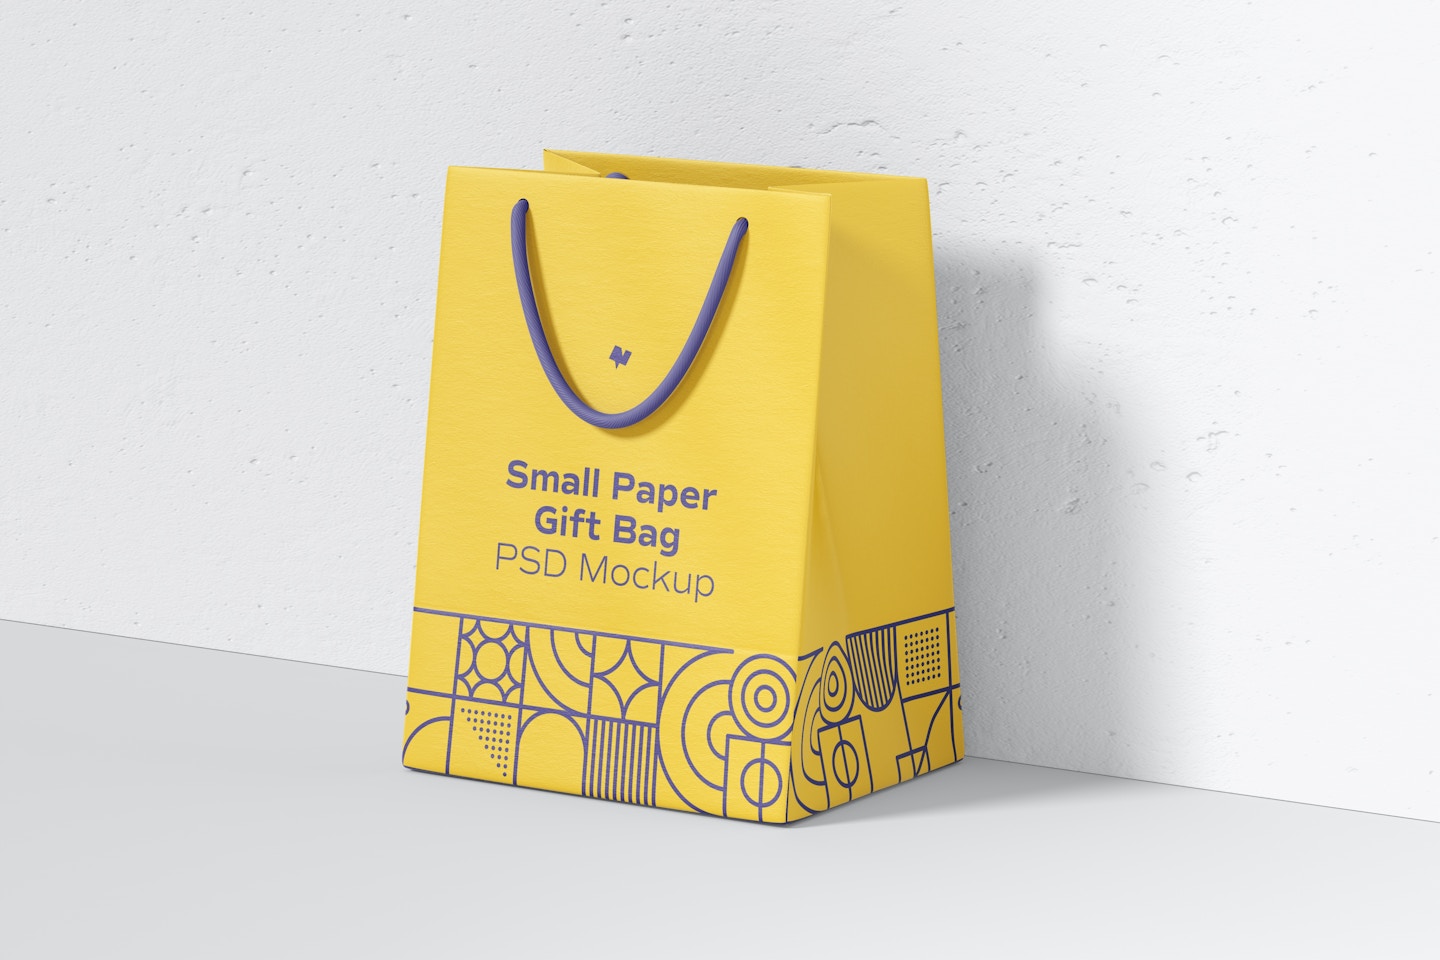 Small Paper Gift Bag With Rope Handle Mockup, Perspective